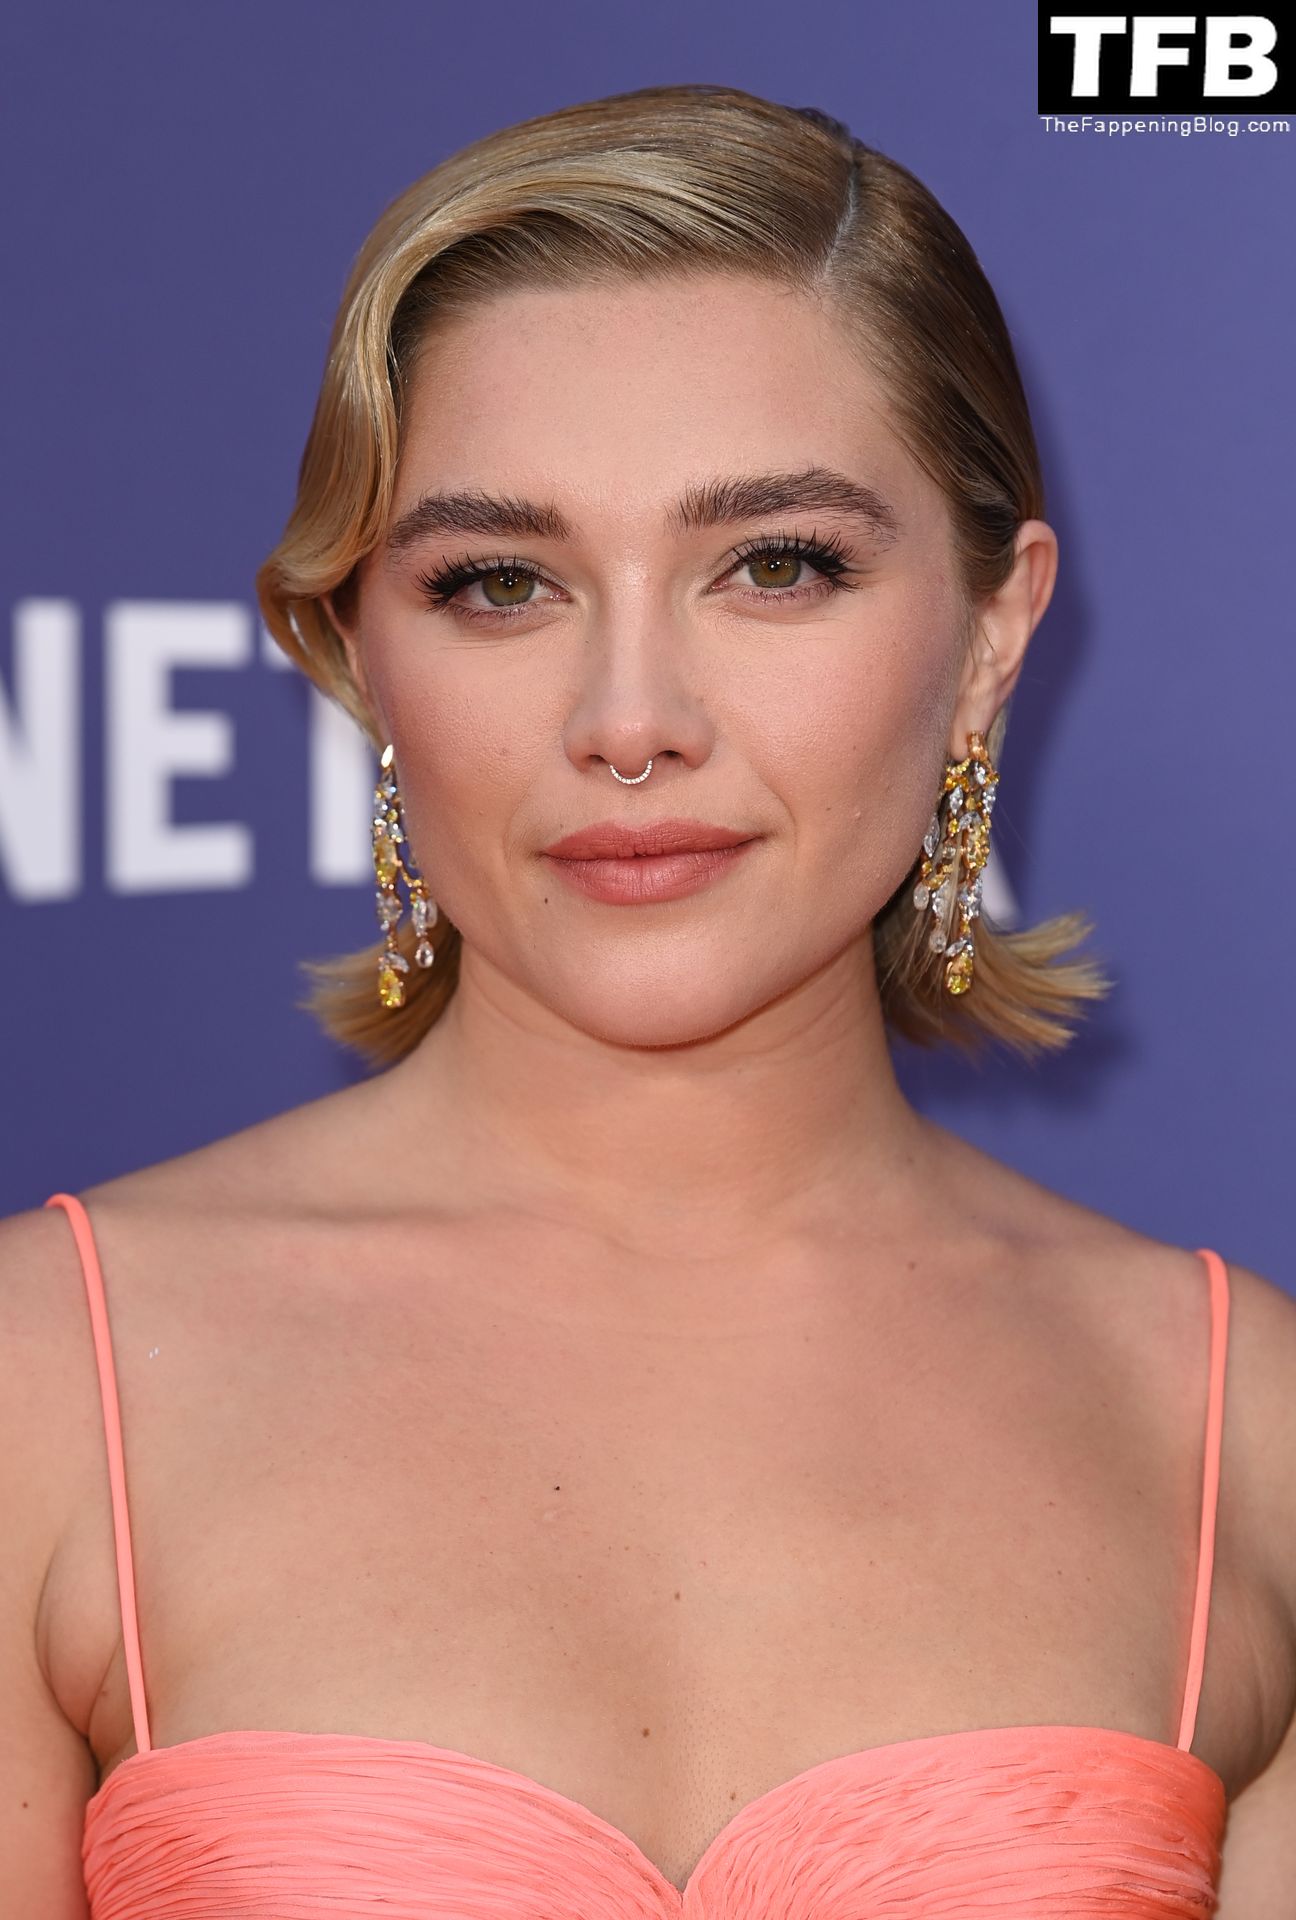 Florence-Pugh-Sexy-The-Fappening-Blog-67-1.jpg